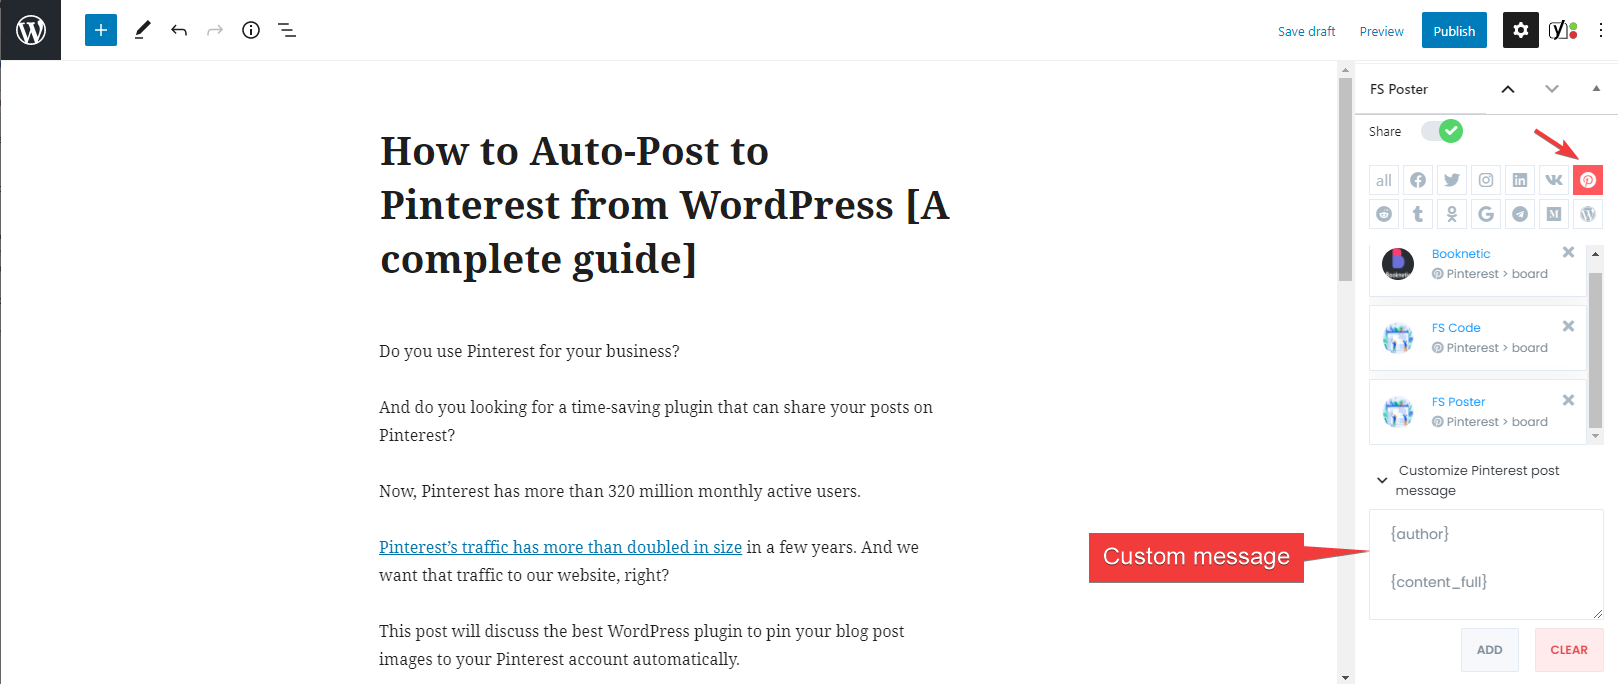 How To Auto-Post From WordPress [A Guide]